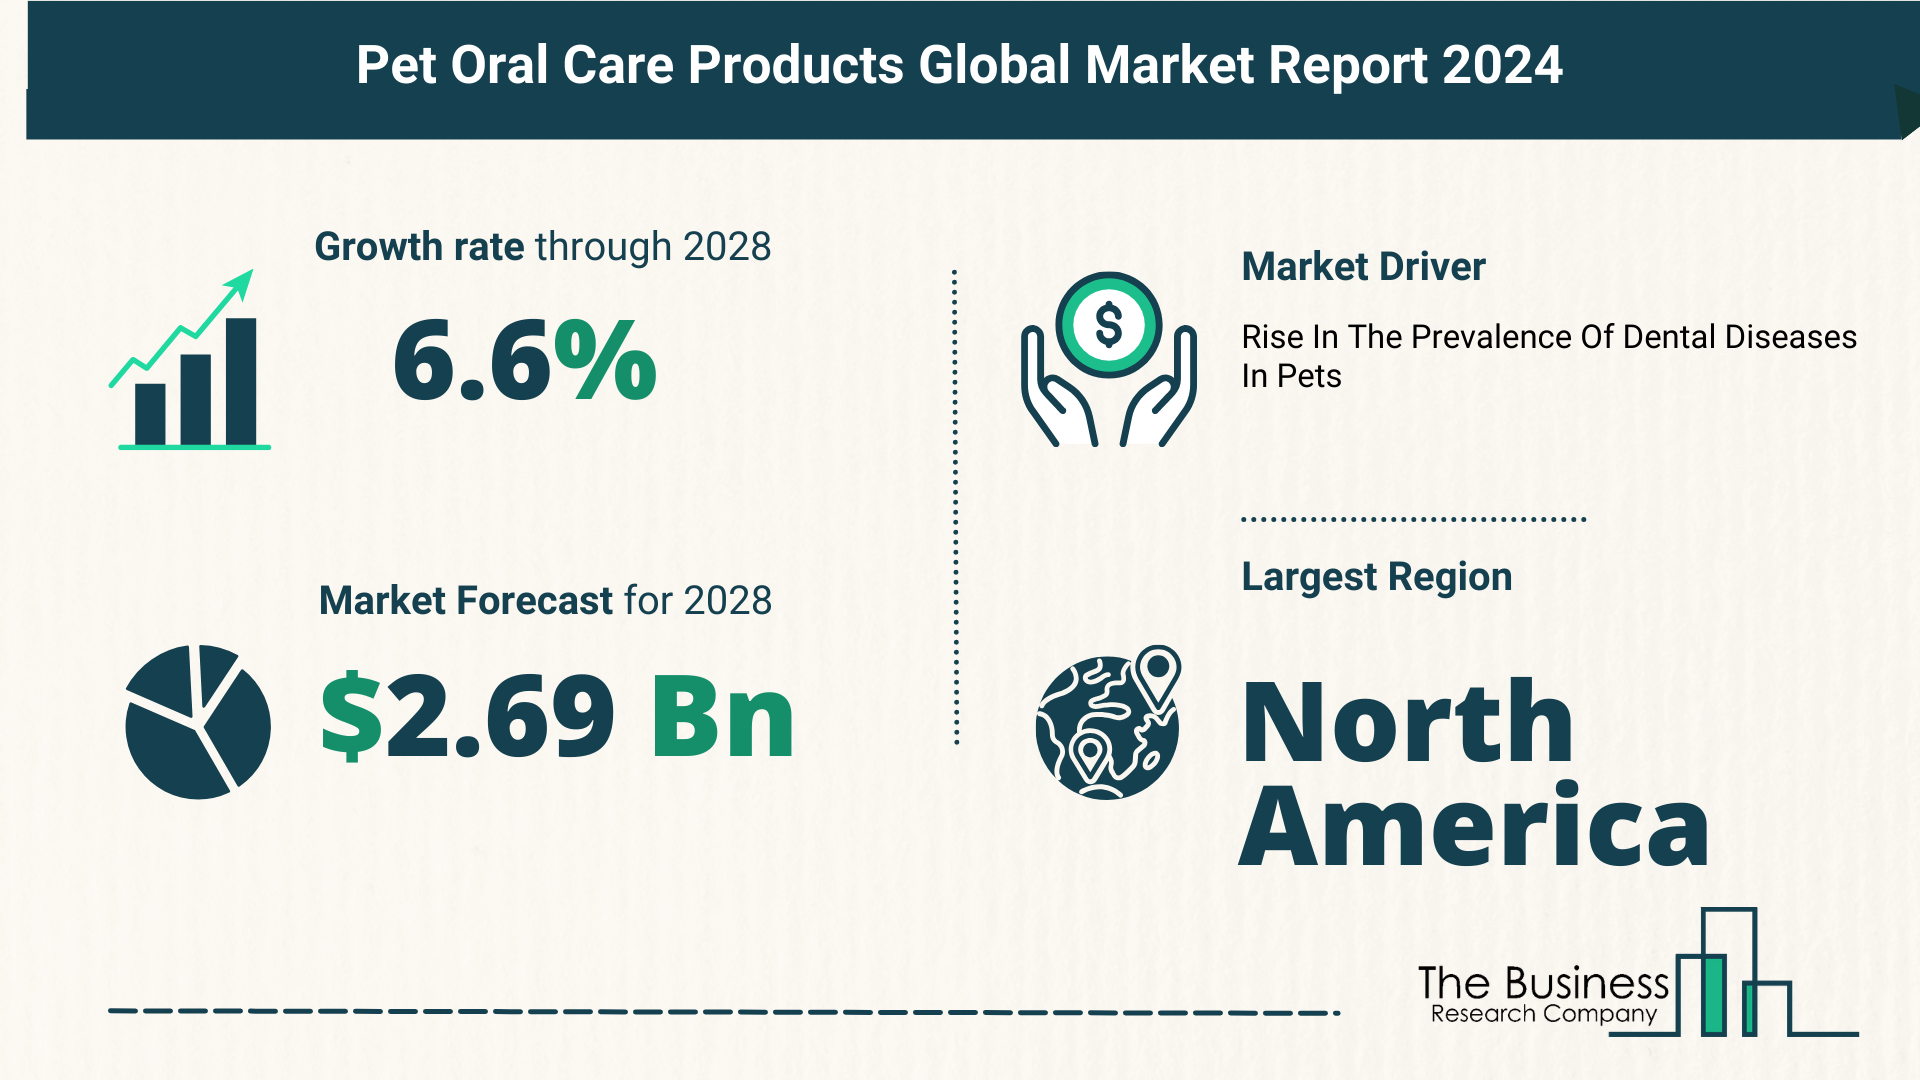 What Is The Forecast Growth Rate For The Pet Oral Care Products Market?